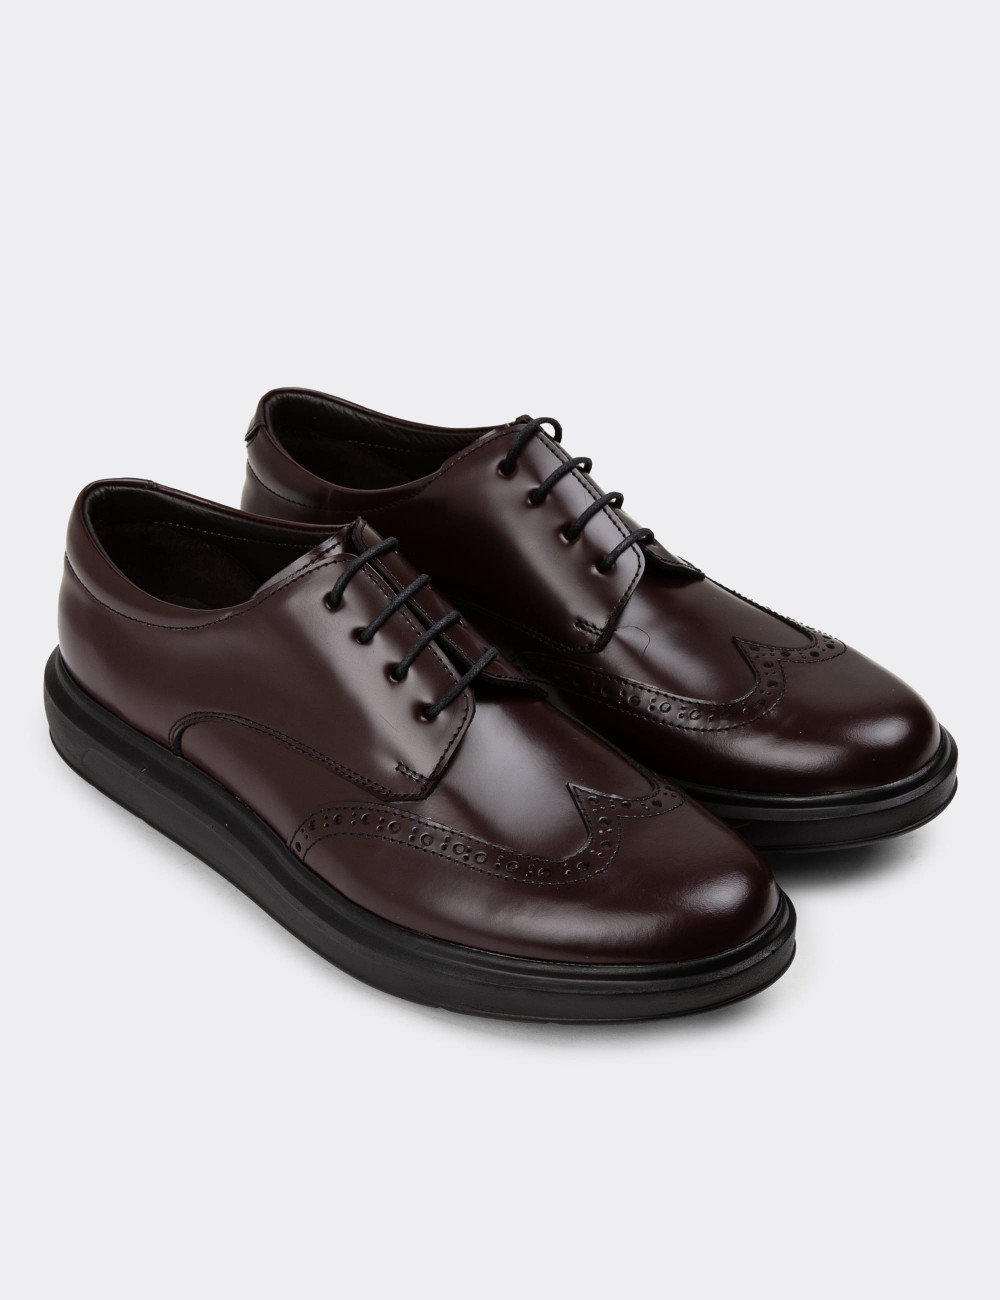 Burgundy Leather Lace-up Shoes - 01942MBRDP01